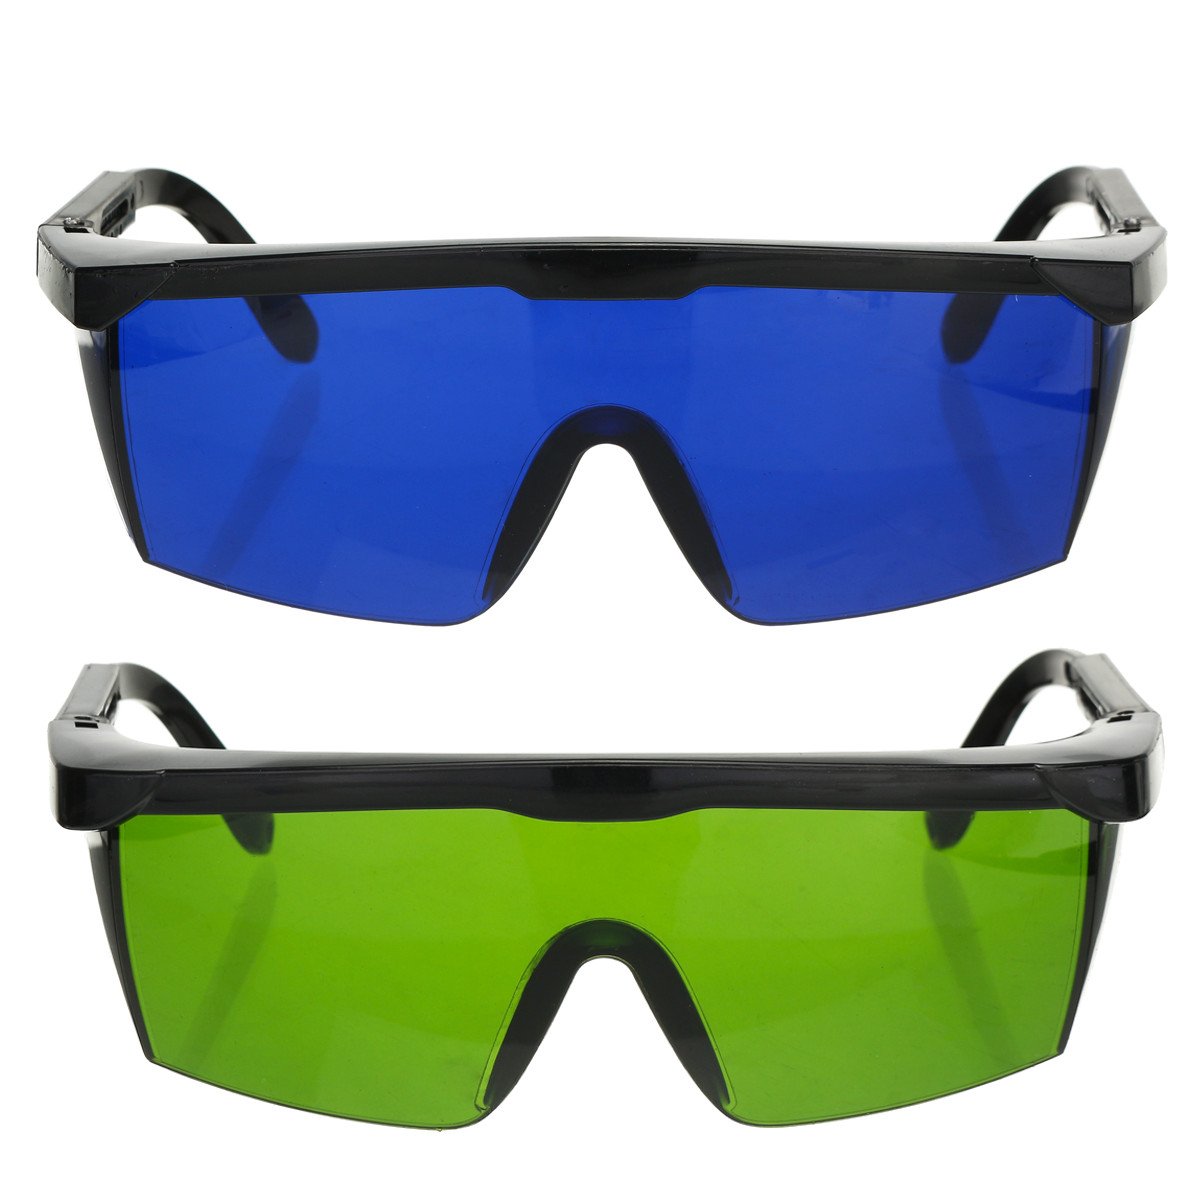 Pro Laser Protection Goggles Protective Safety Glasses IPL OD+4D 190nm-2000nm Laser Goggles 2